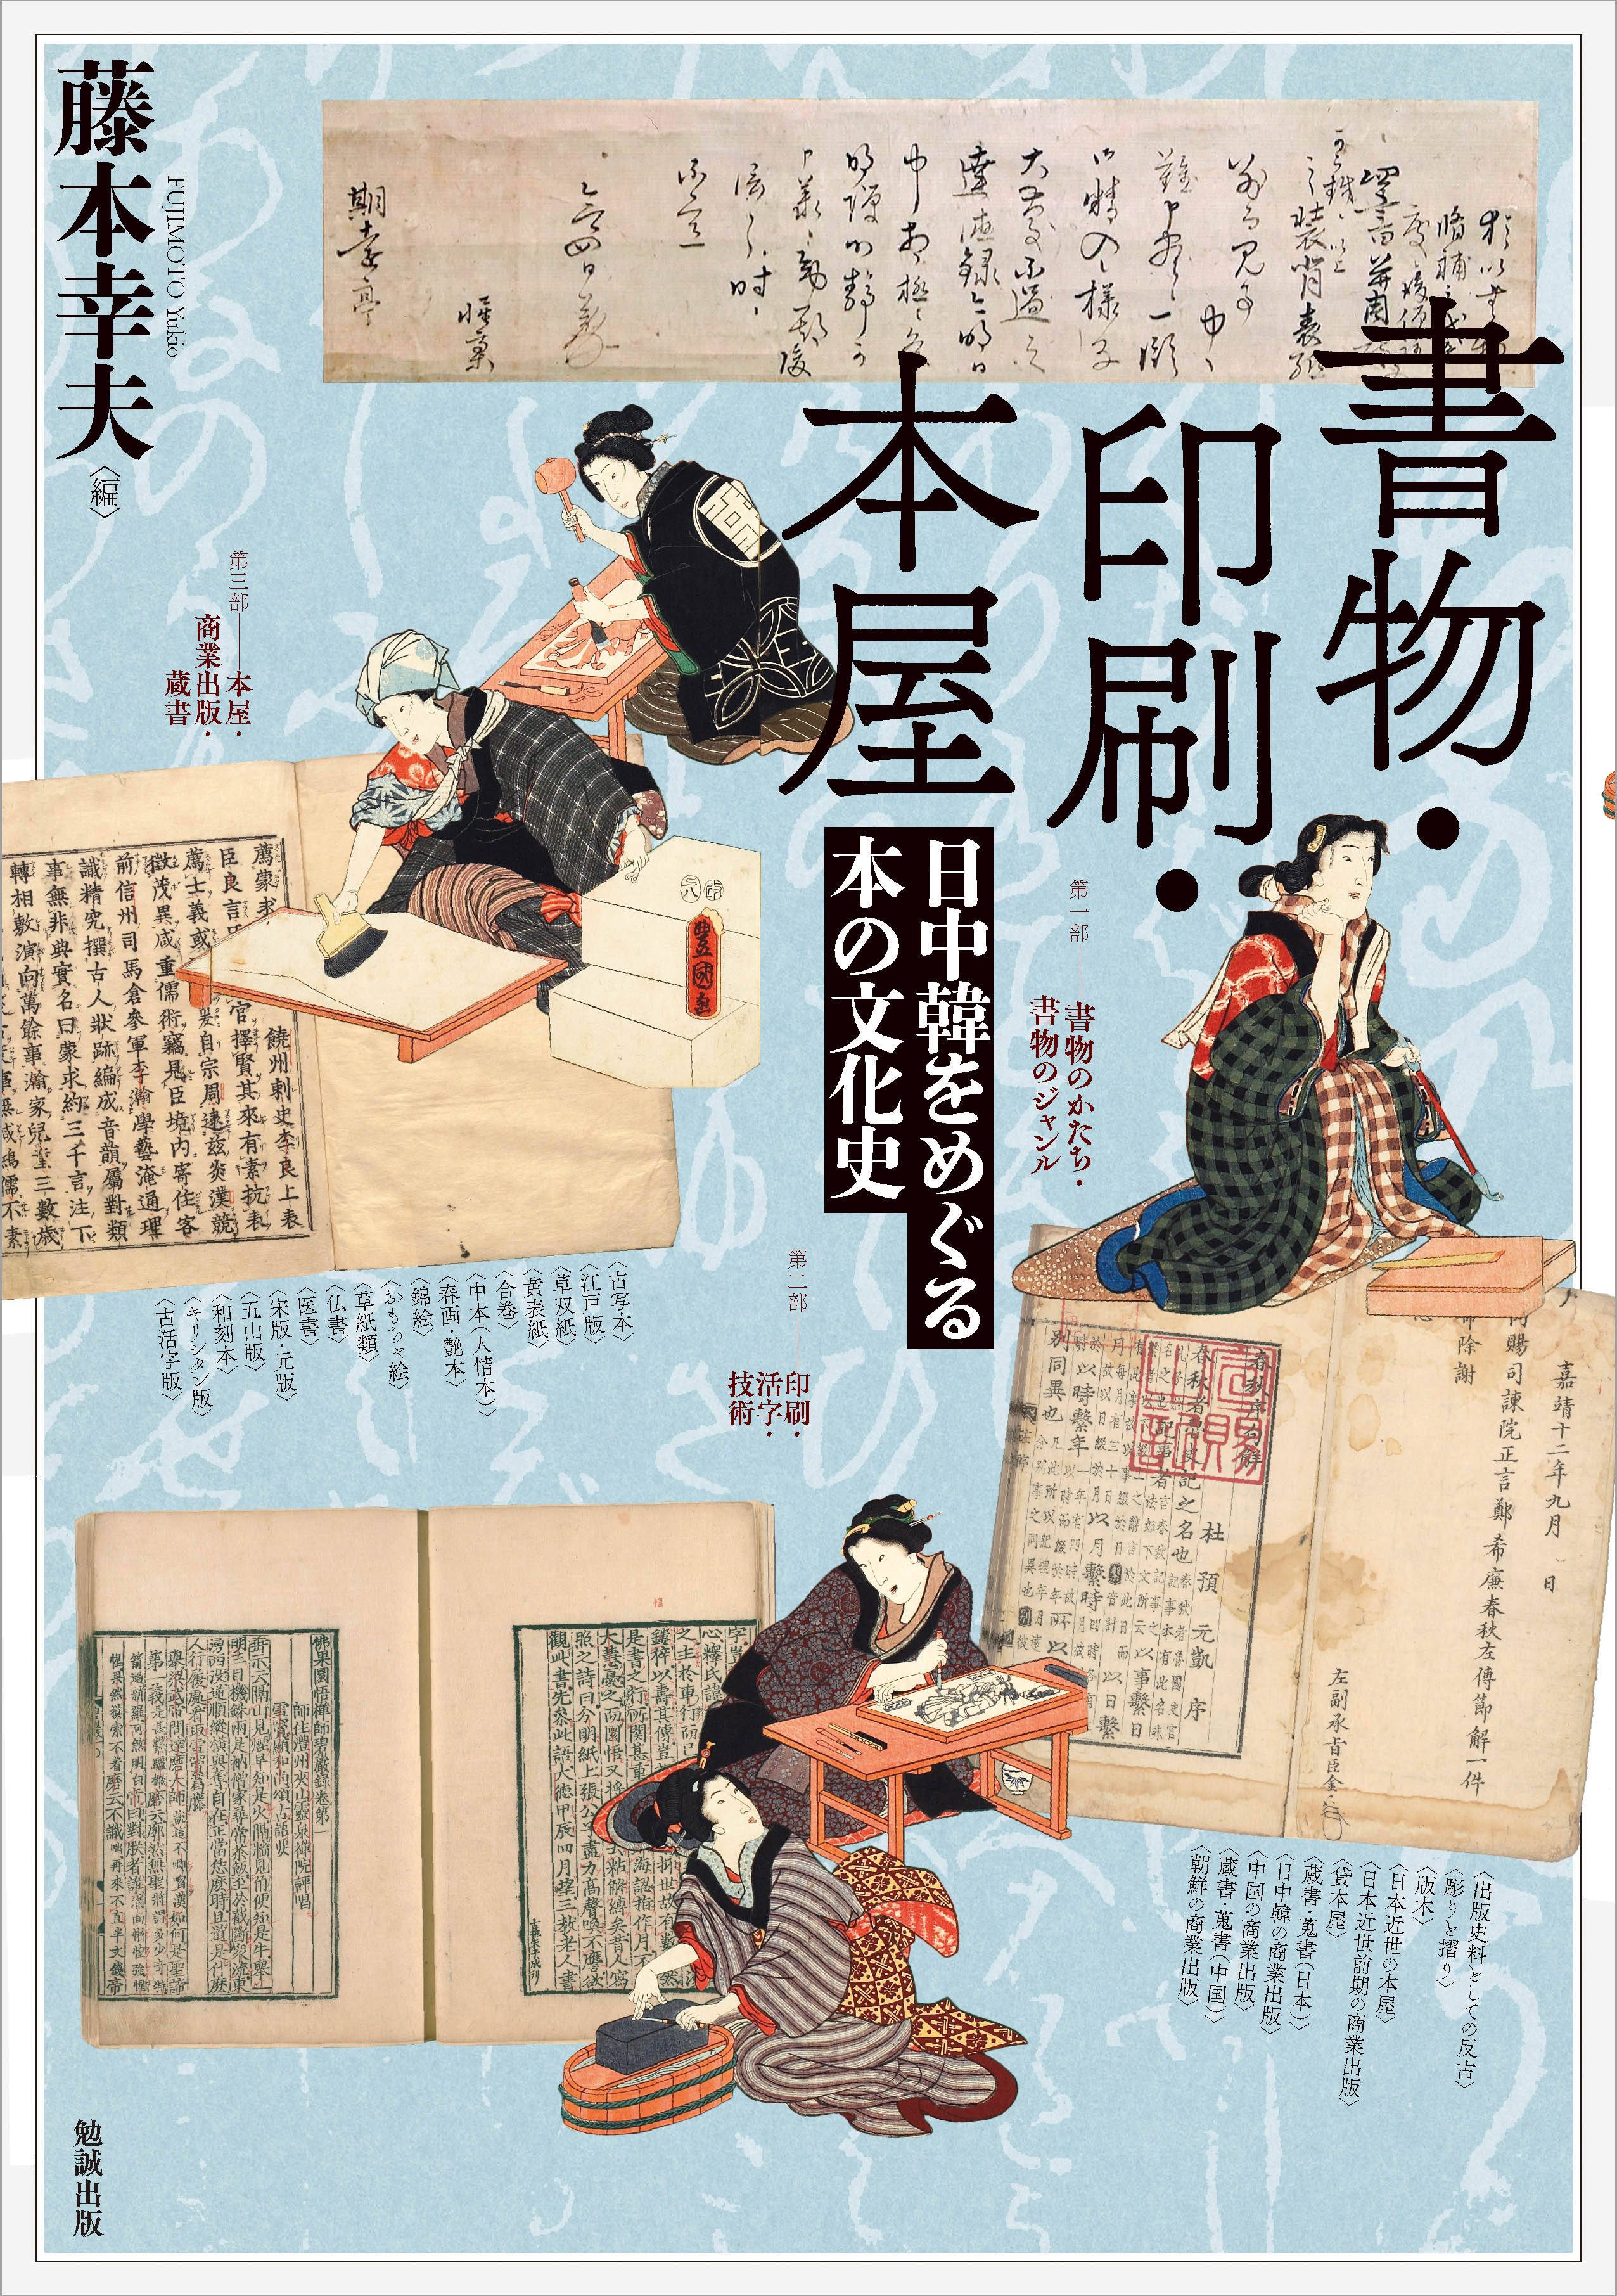 Some picture of old books and Ukiyoe-women